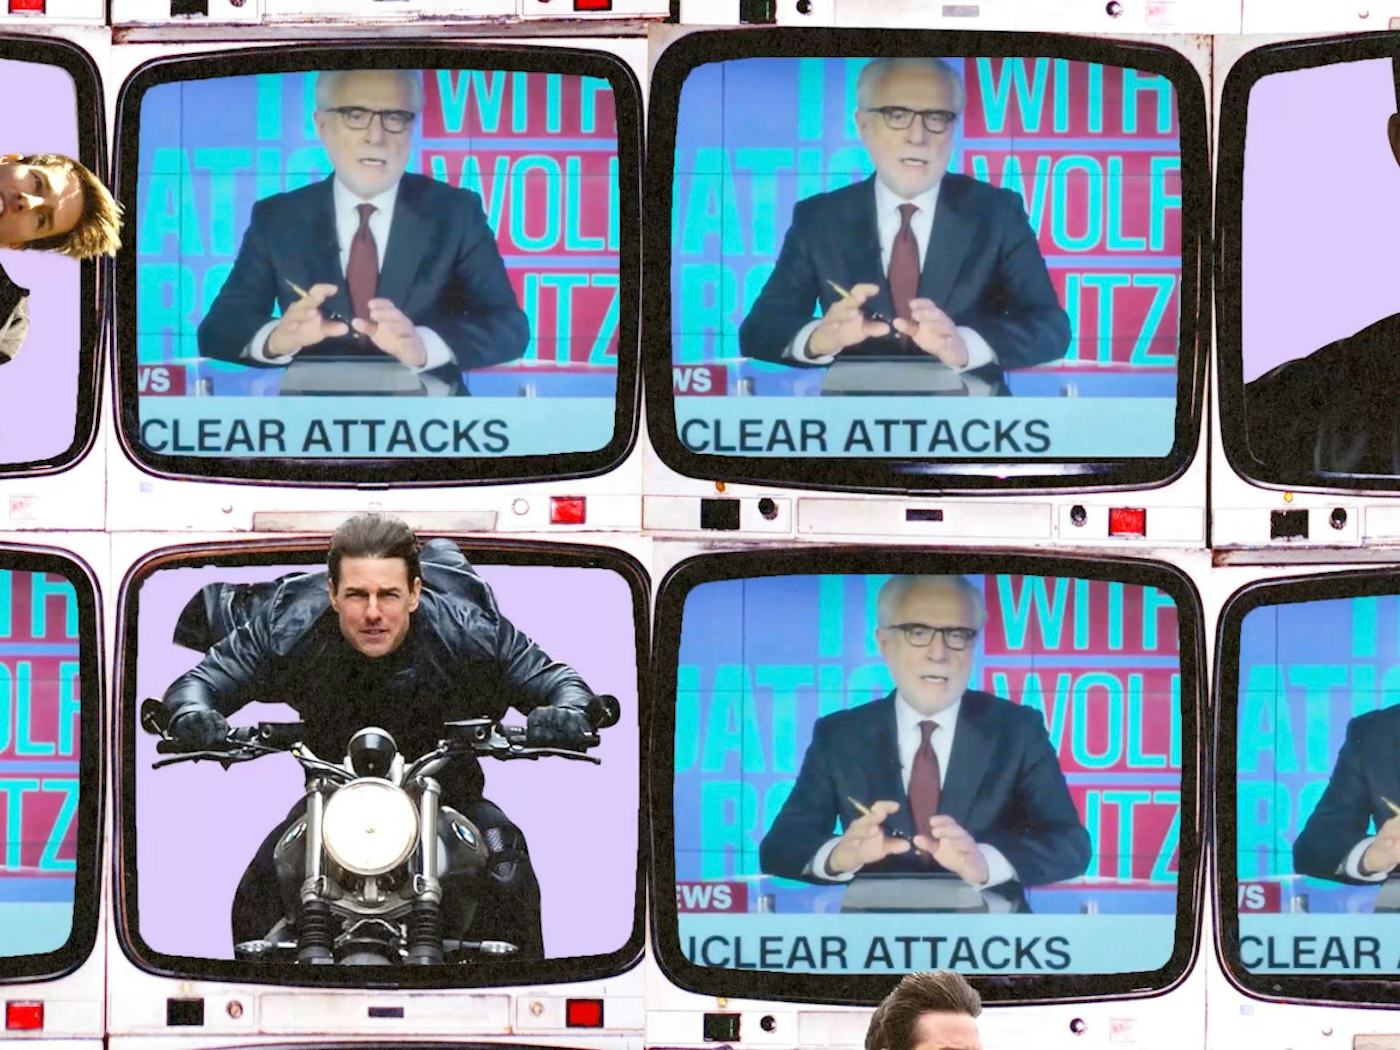 A collage of vintage TV screens showing a man on a motorcycle and a news anchor, repeated multiple times with a pop-art style.